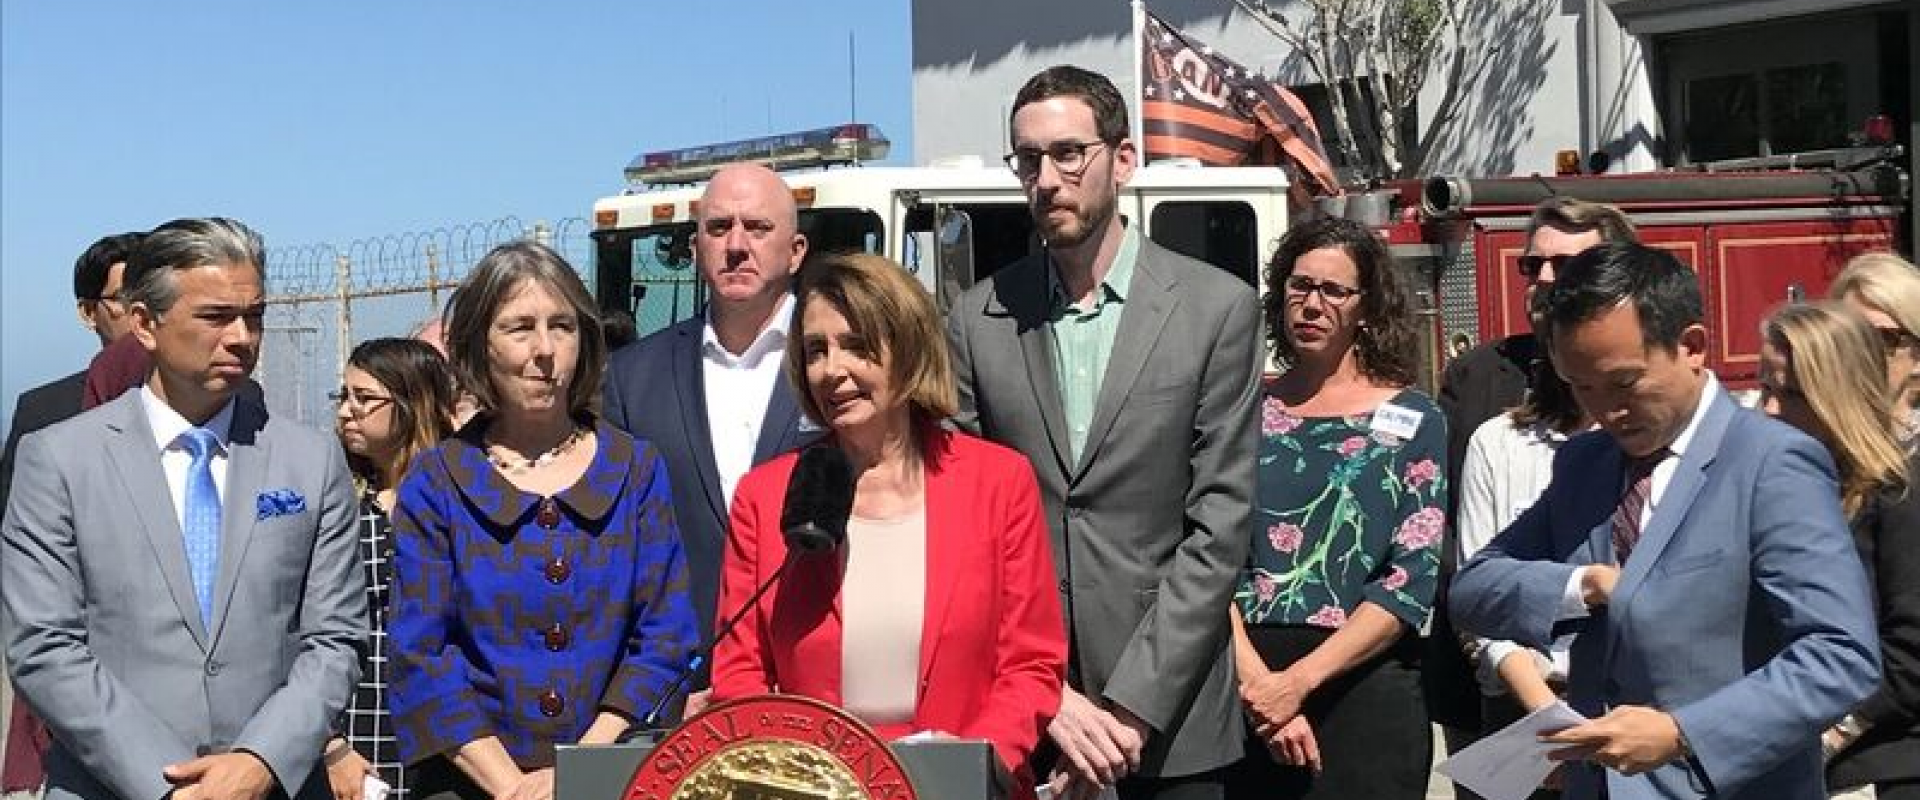 Congresswoman Pelosi joined Senator Scott Wiener, firefighters, state legislators and community advocates in support of Senate Bill 822, which would enact the strongest net neutrality standards in the nation.  